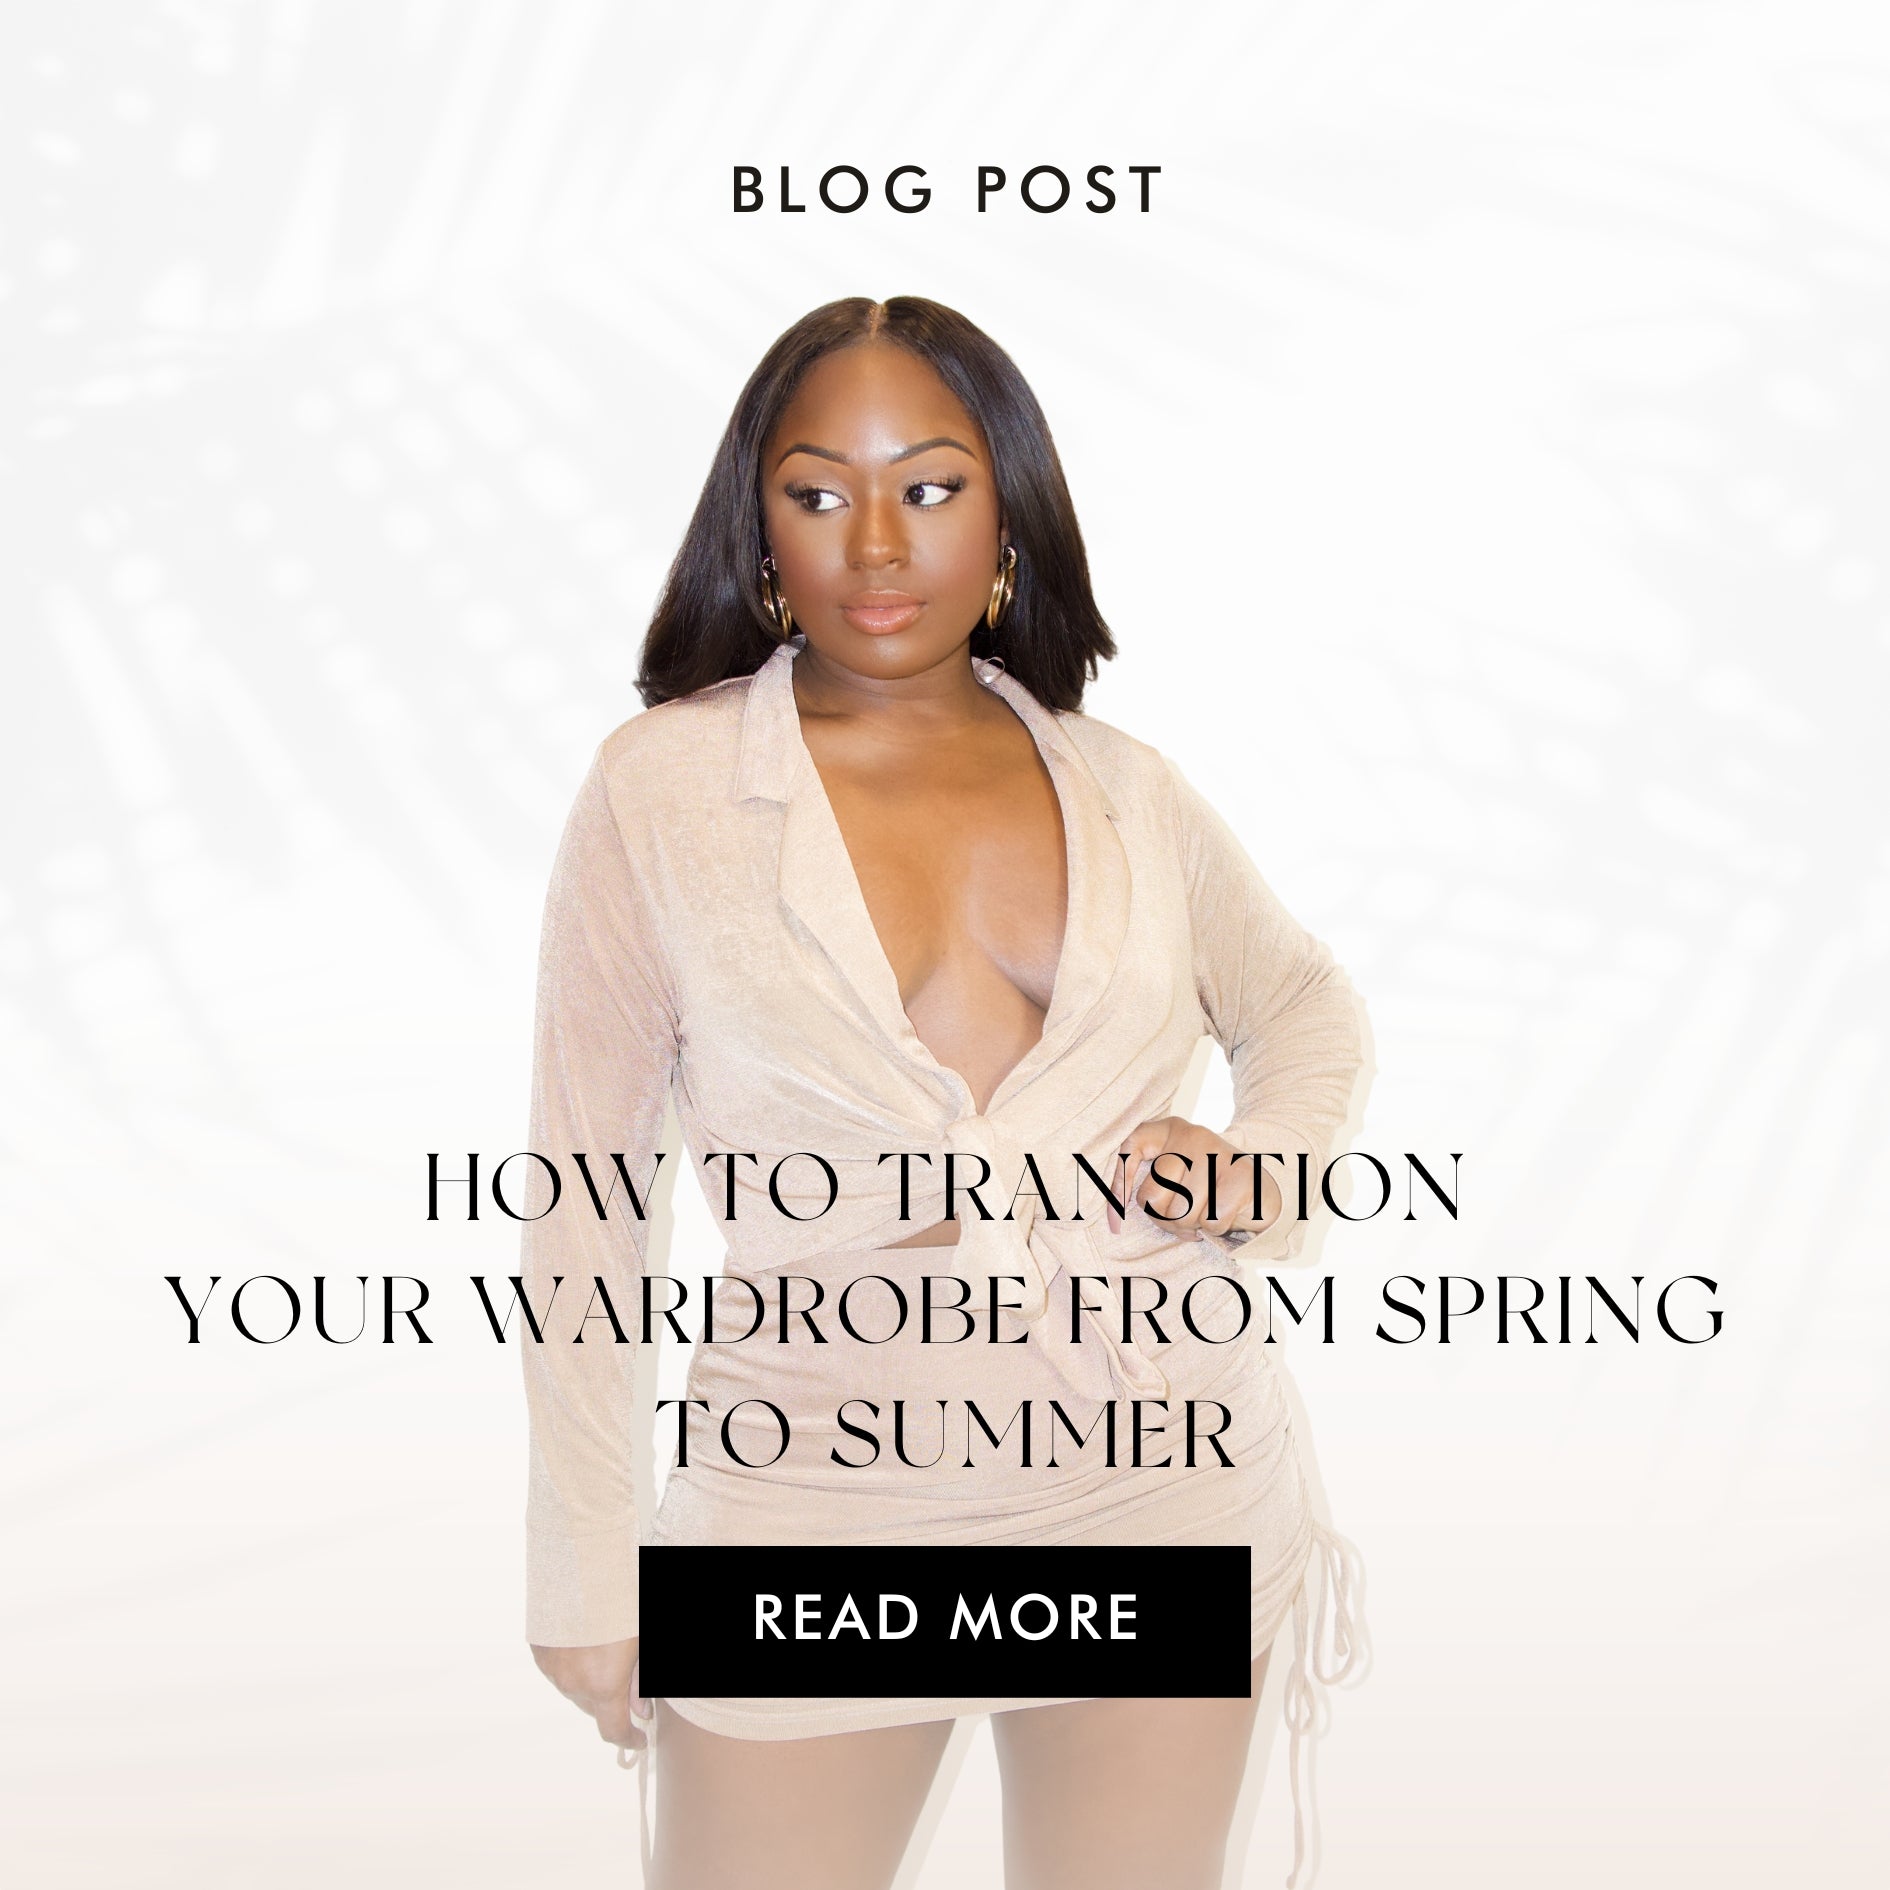 How to Transition Your Wardrobe from Spring to Summer